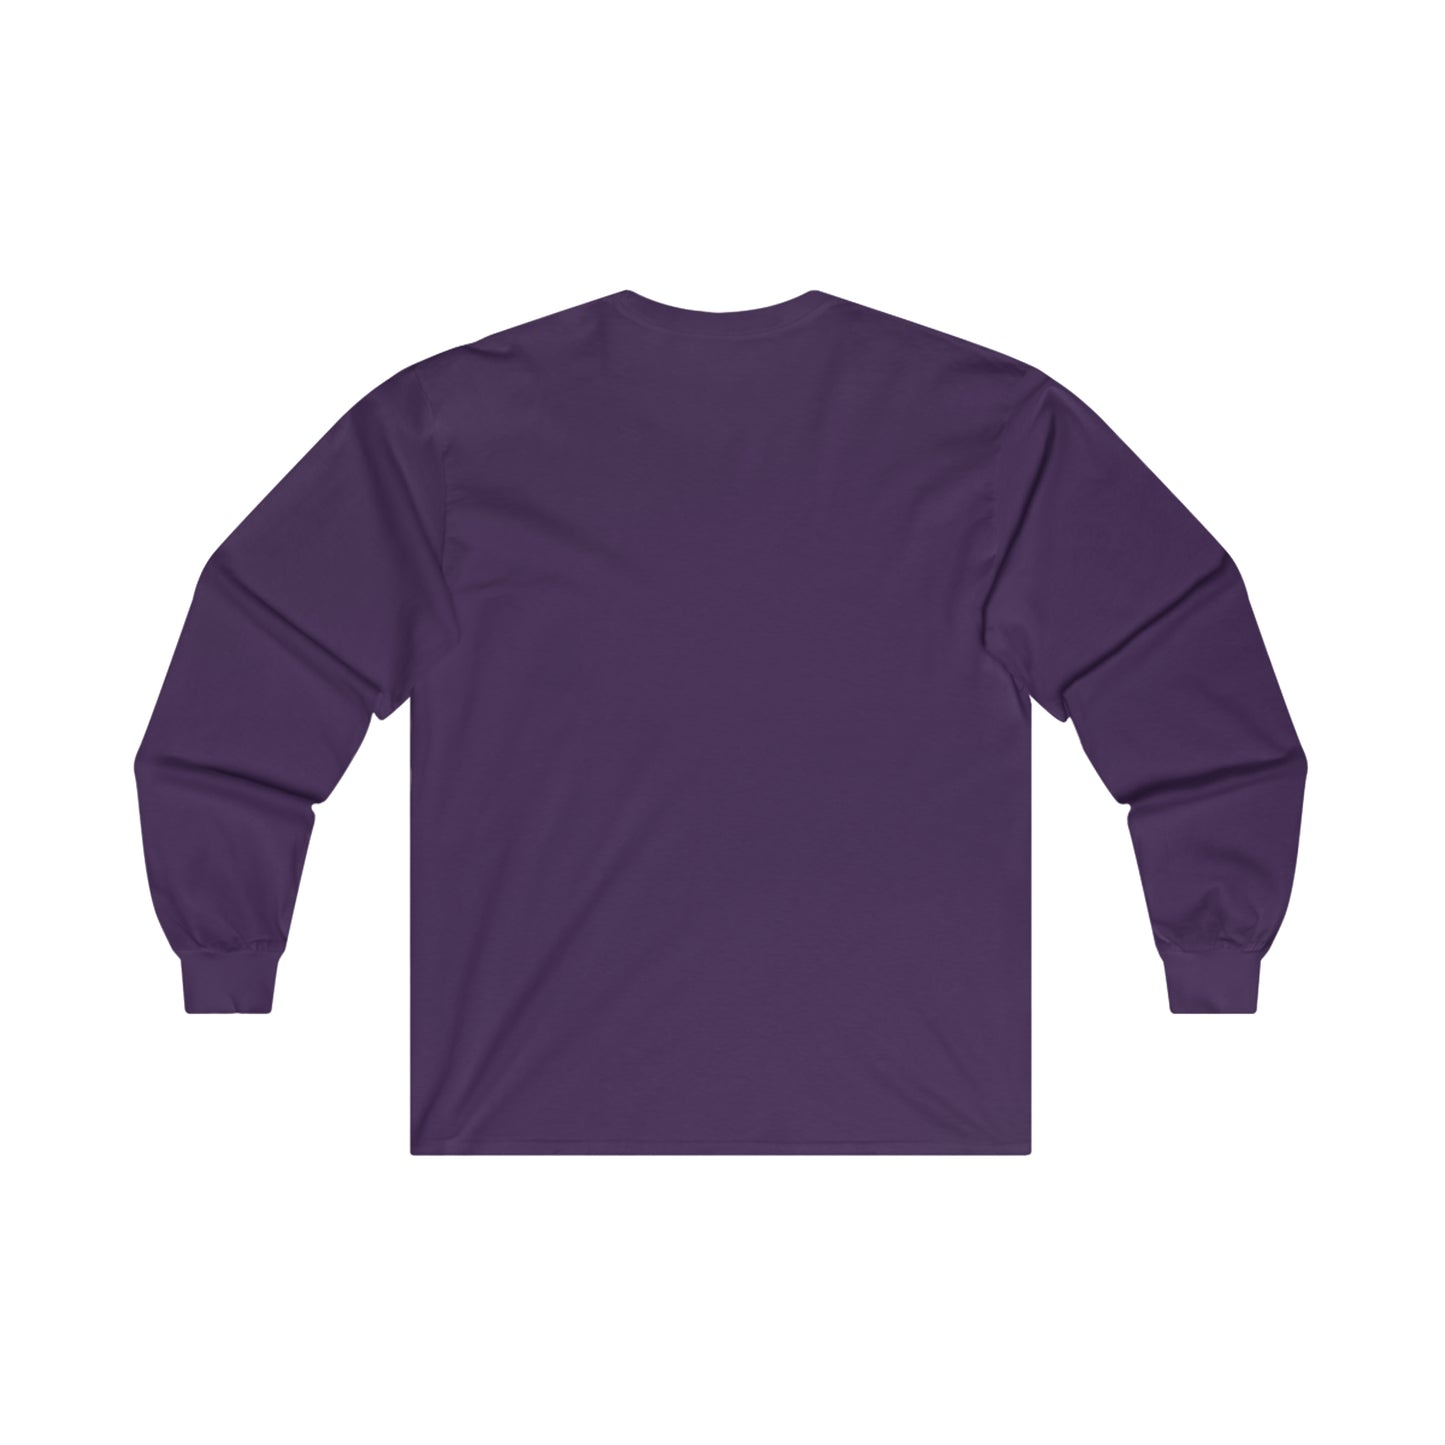 A Gift for The Witchy Member of The Team on Halloween Ultra Cotton Long Sleeve Tee